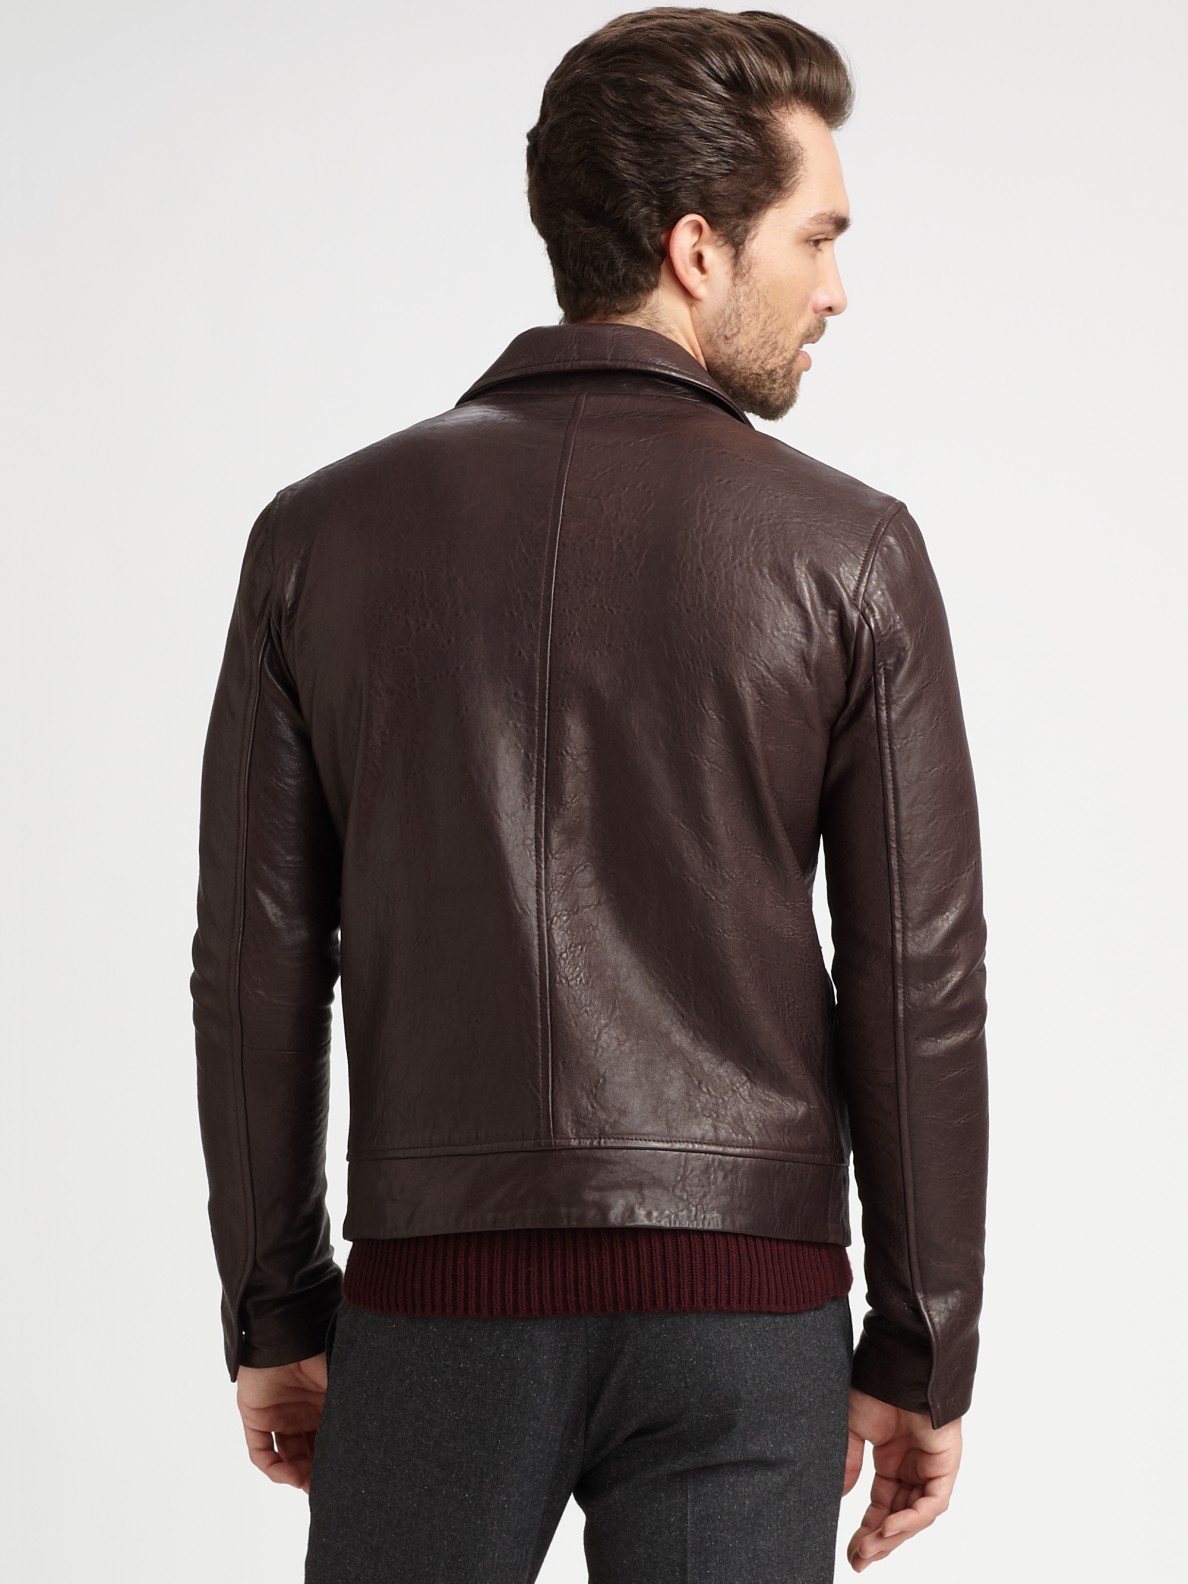 Theory Lambskin Leather Jacket in Brown for Men - Lyst